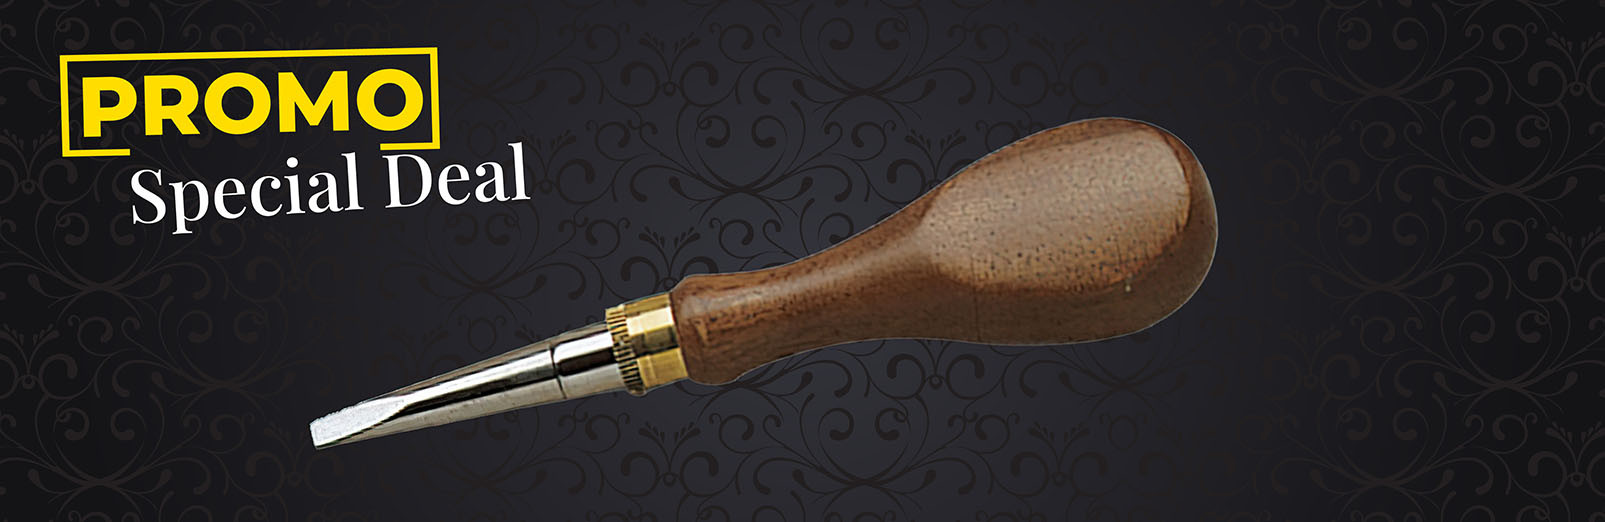 English screwdriver with wooden handle